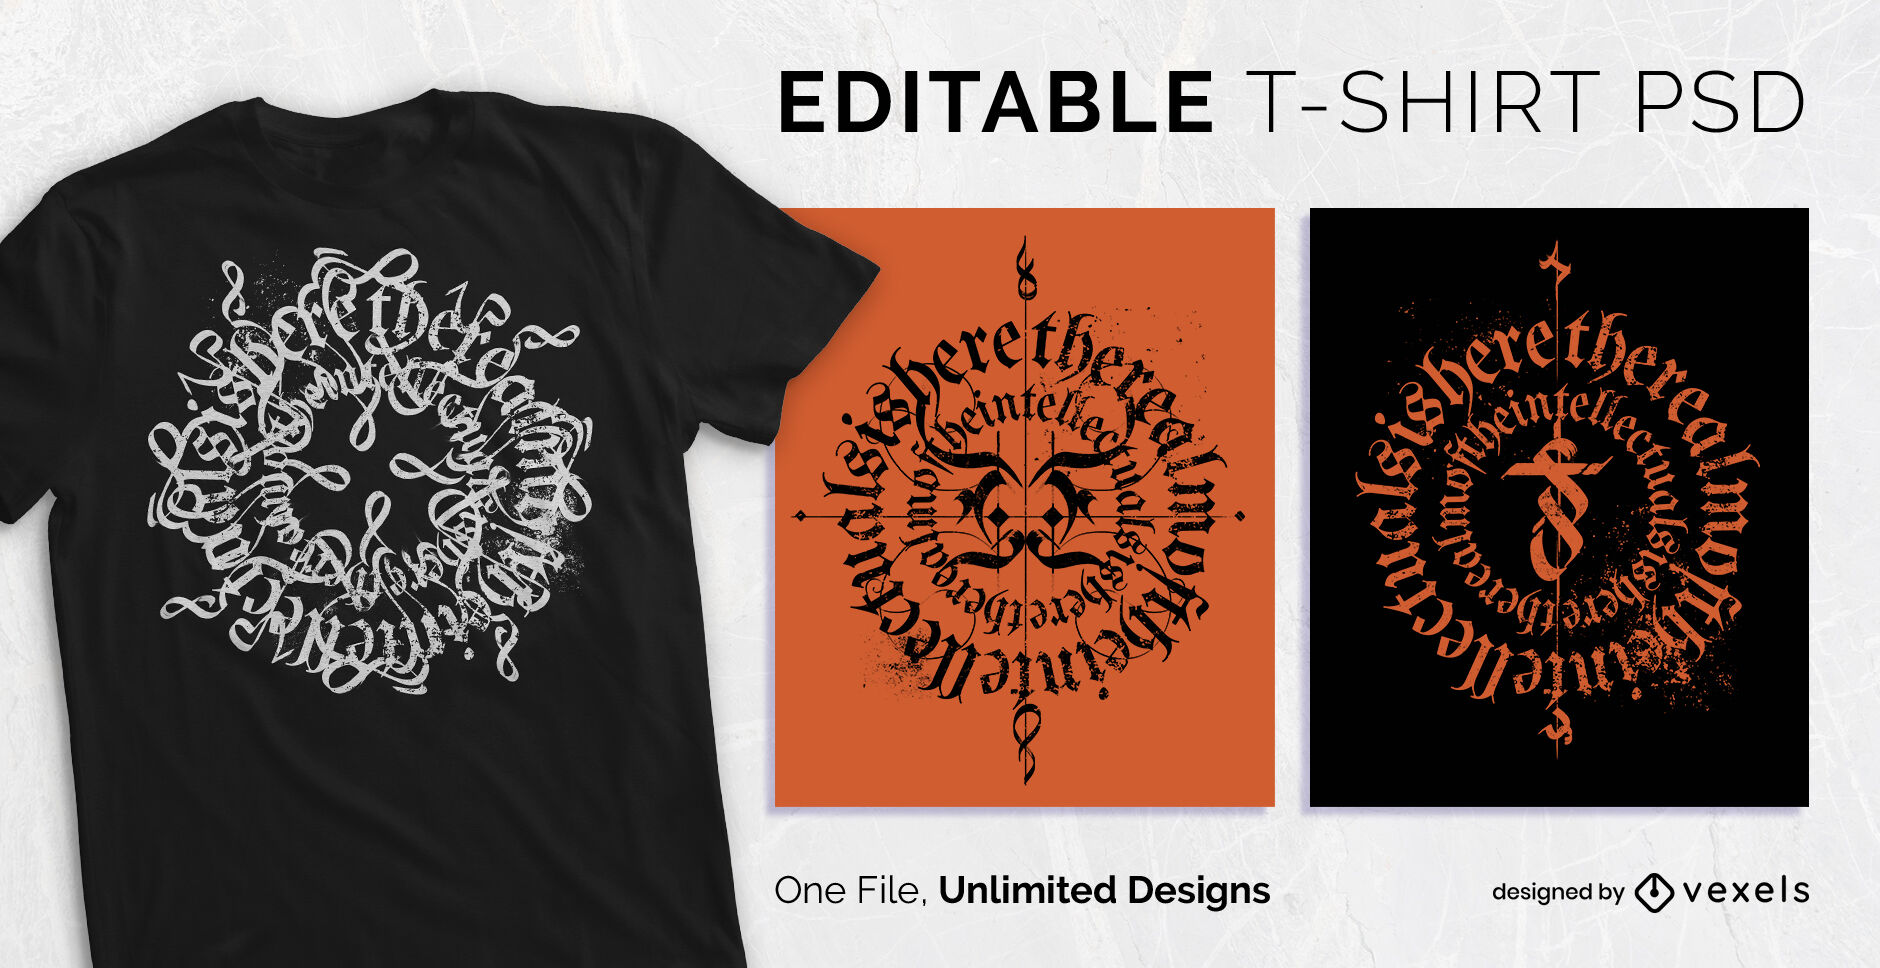 Spiral gothic text scalable t-shirt psd